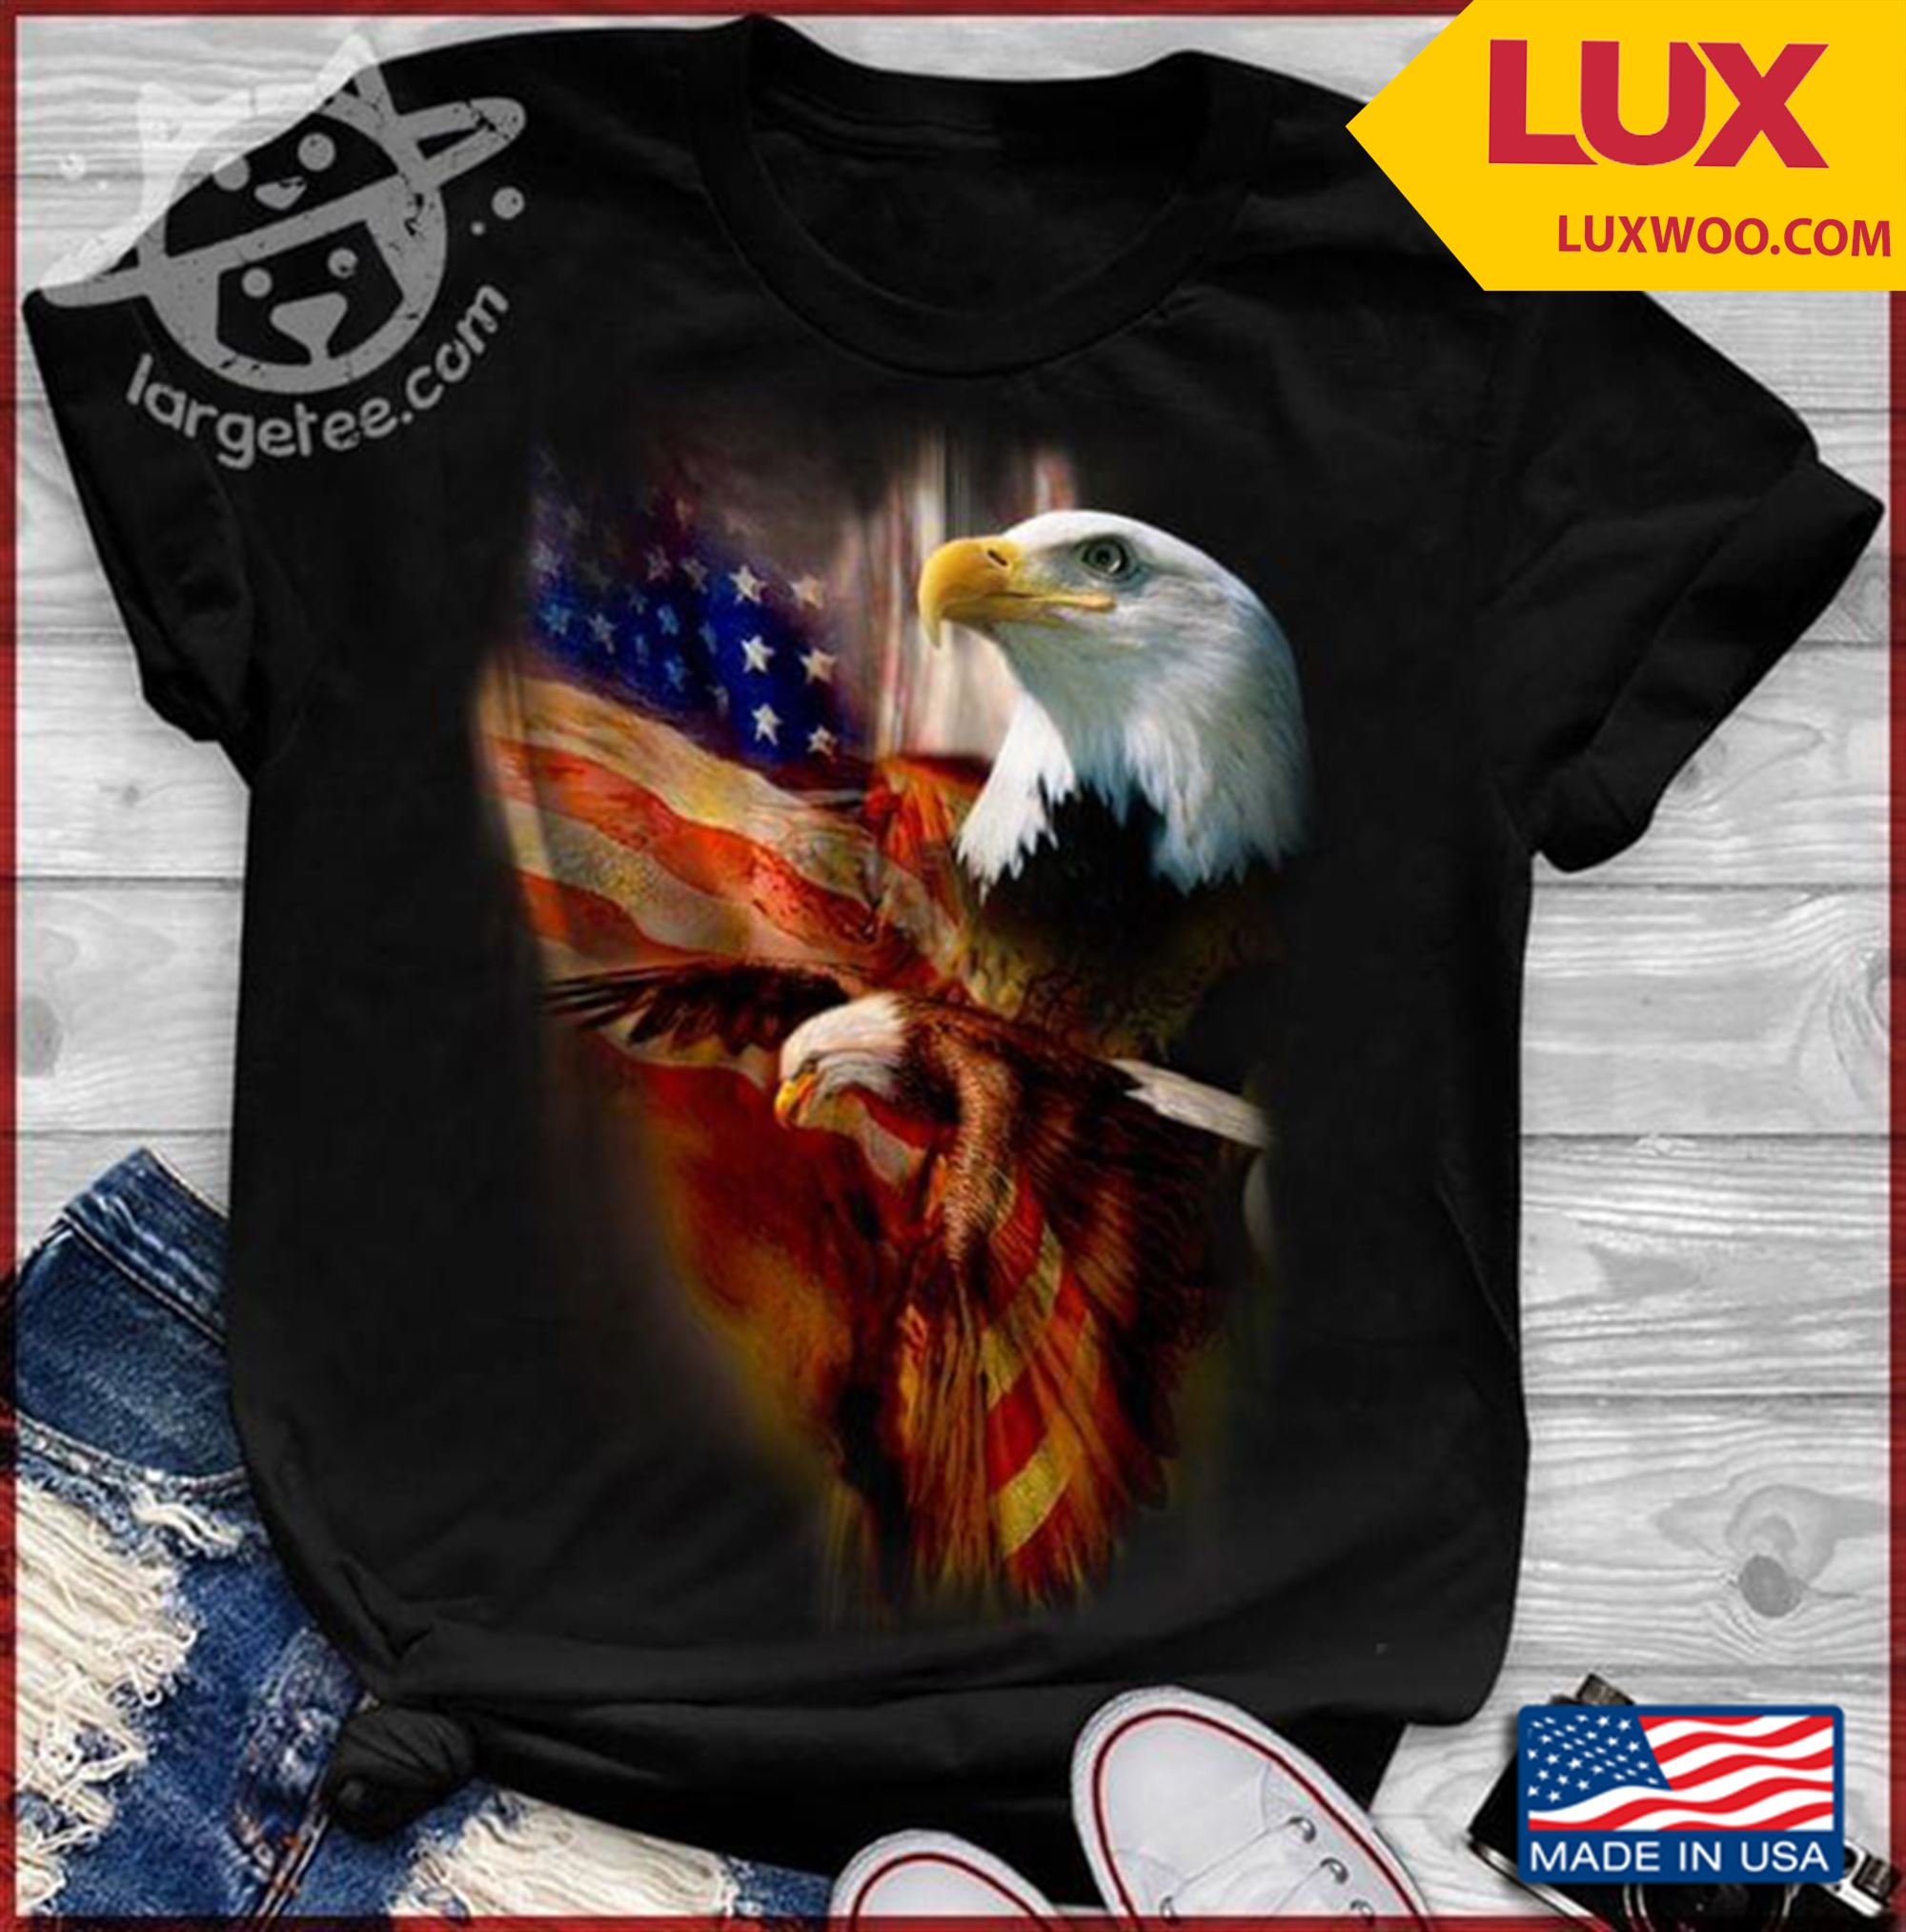 Two Eagles And American Flag Tshirt Size Up To 5xl